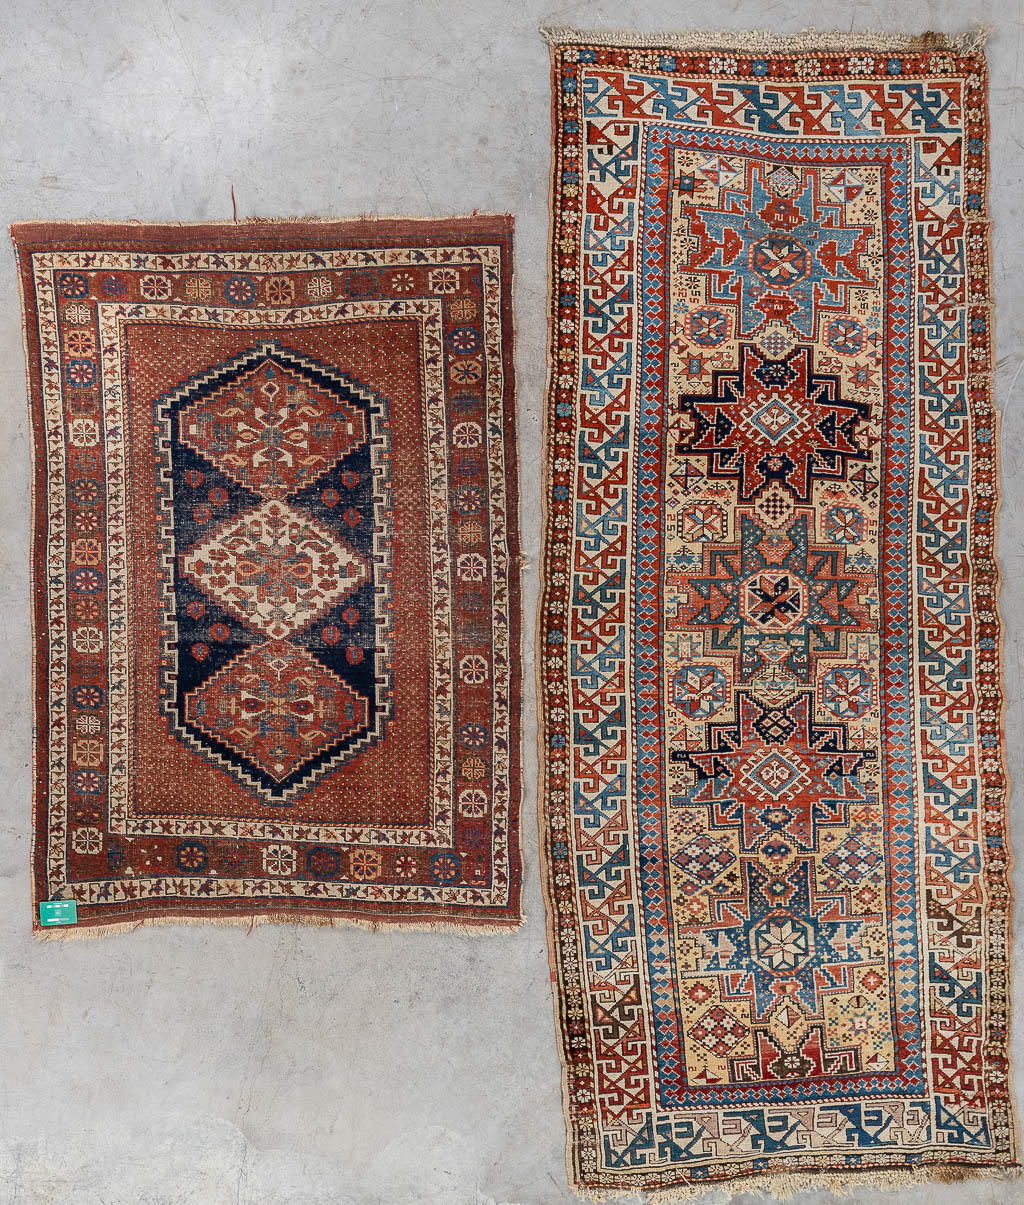 A collection of 2 Oriental hand-made carpets. Probably Caucasian. (L: 277 x W: 115 cm)